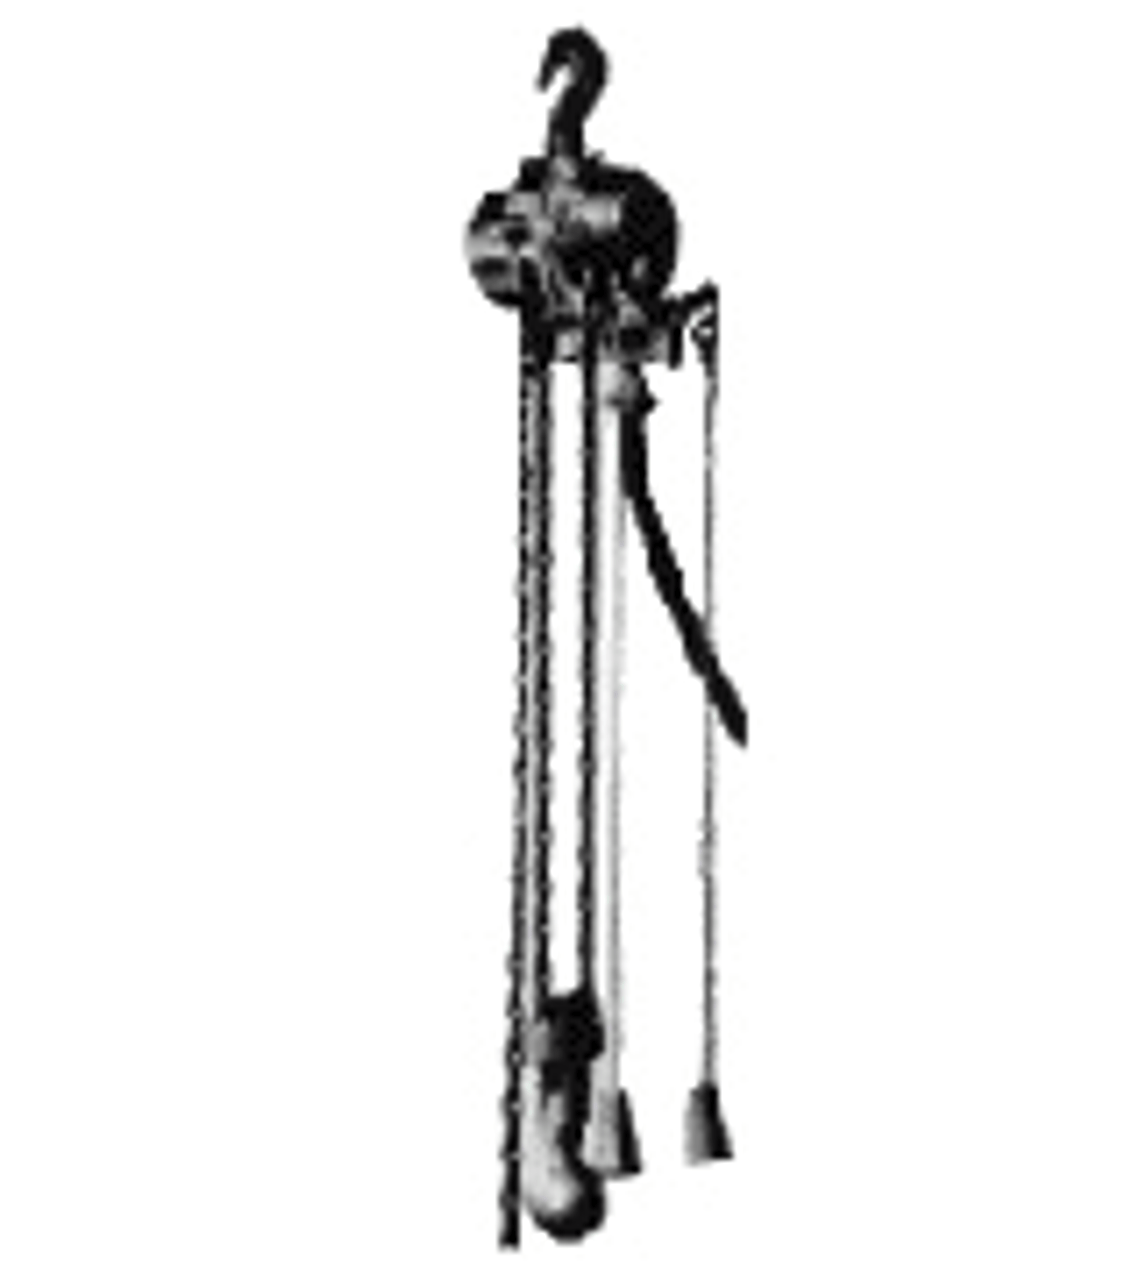 IMPA 591354 Chain hoist pneumatic - 1 ton - 5,3 mtr./min with full load TCR1000C2 with 3 mtr. chain (lift)-ATEX zone 2 & 22 (NO STOCK)